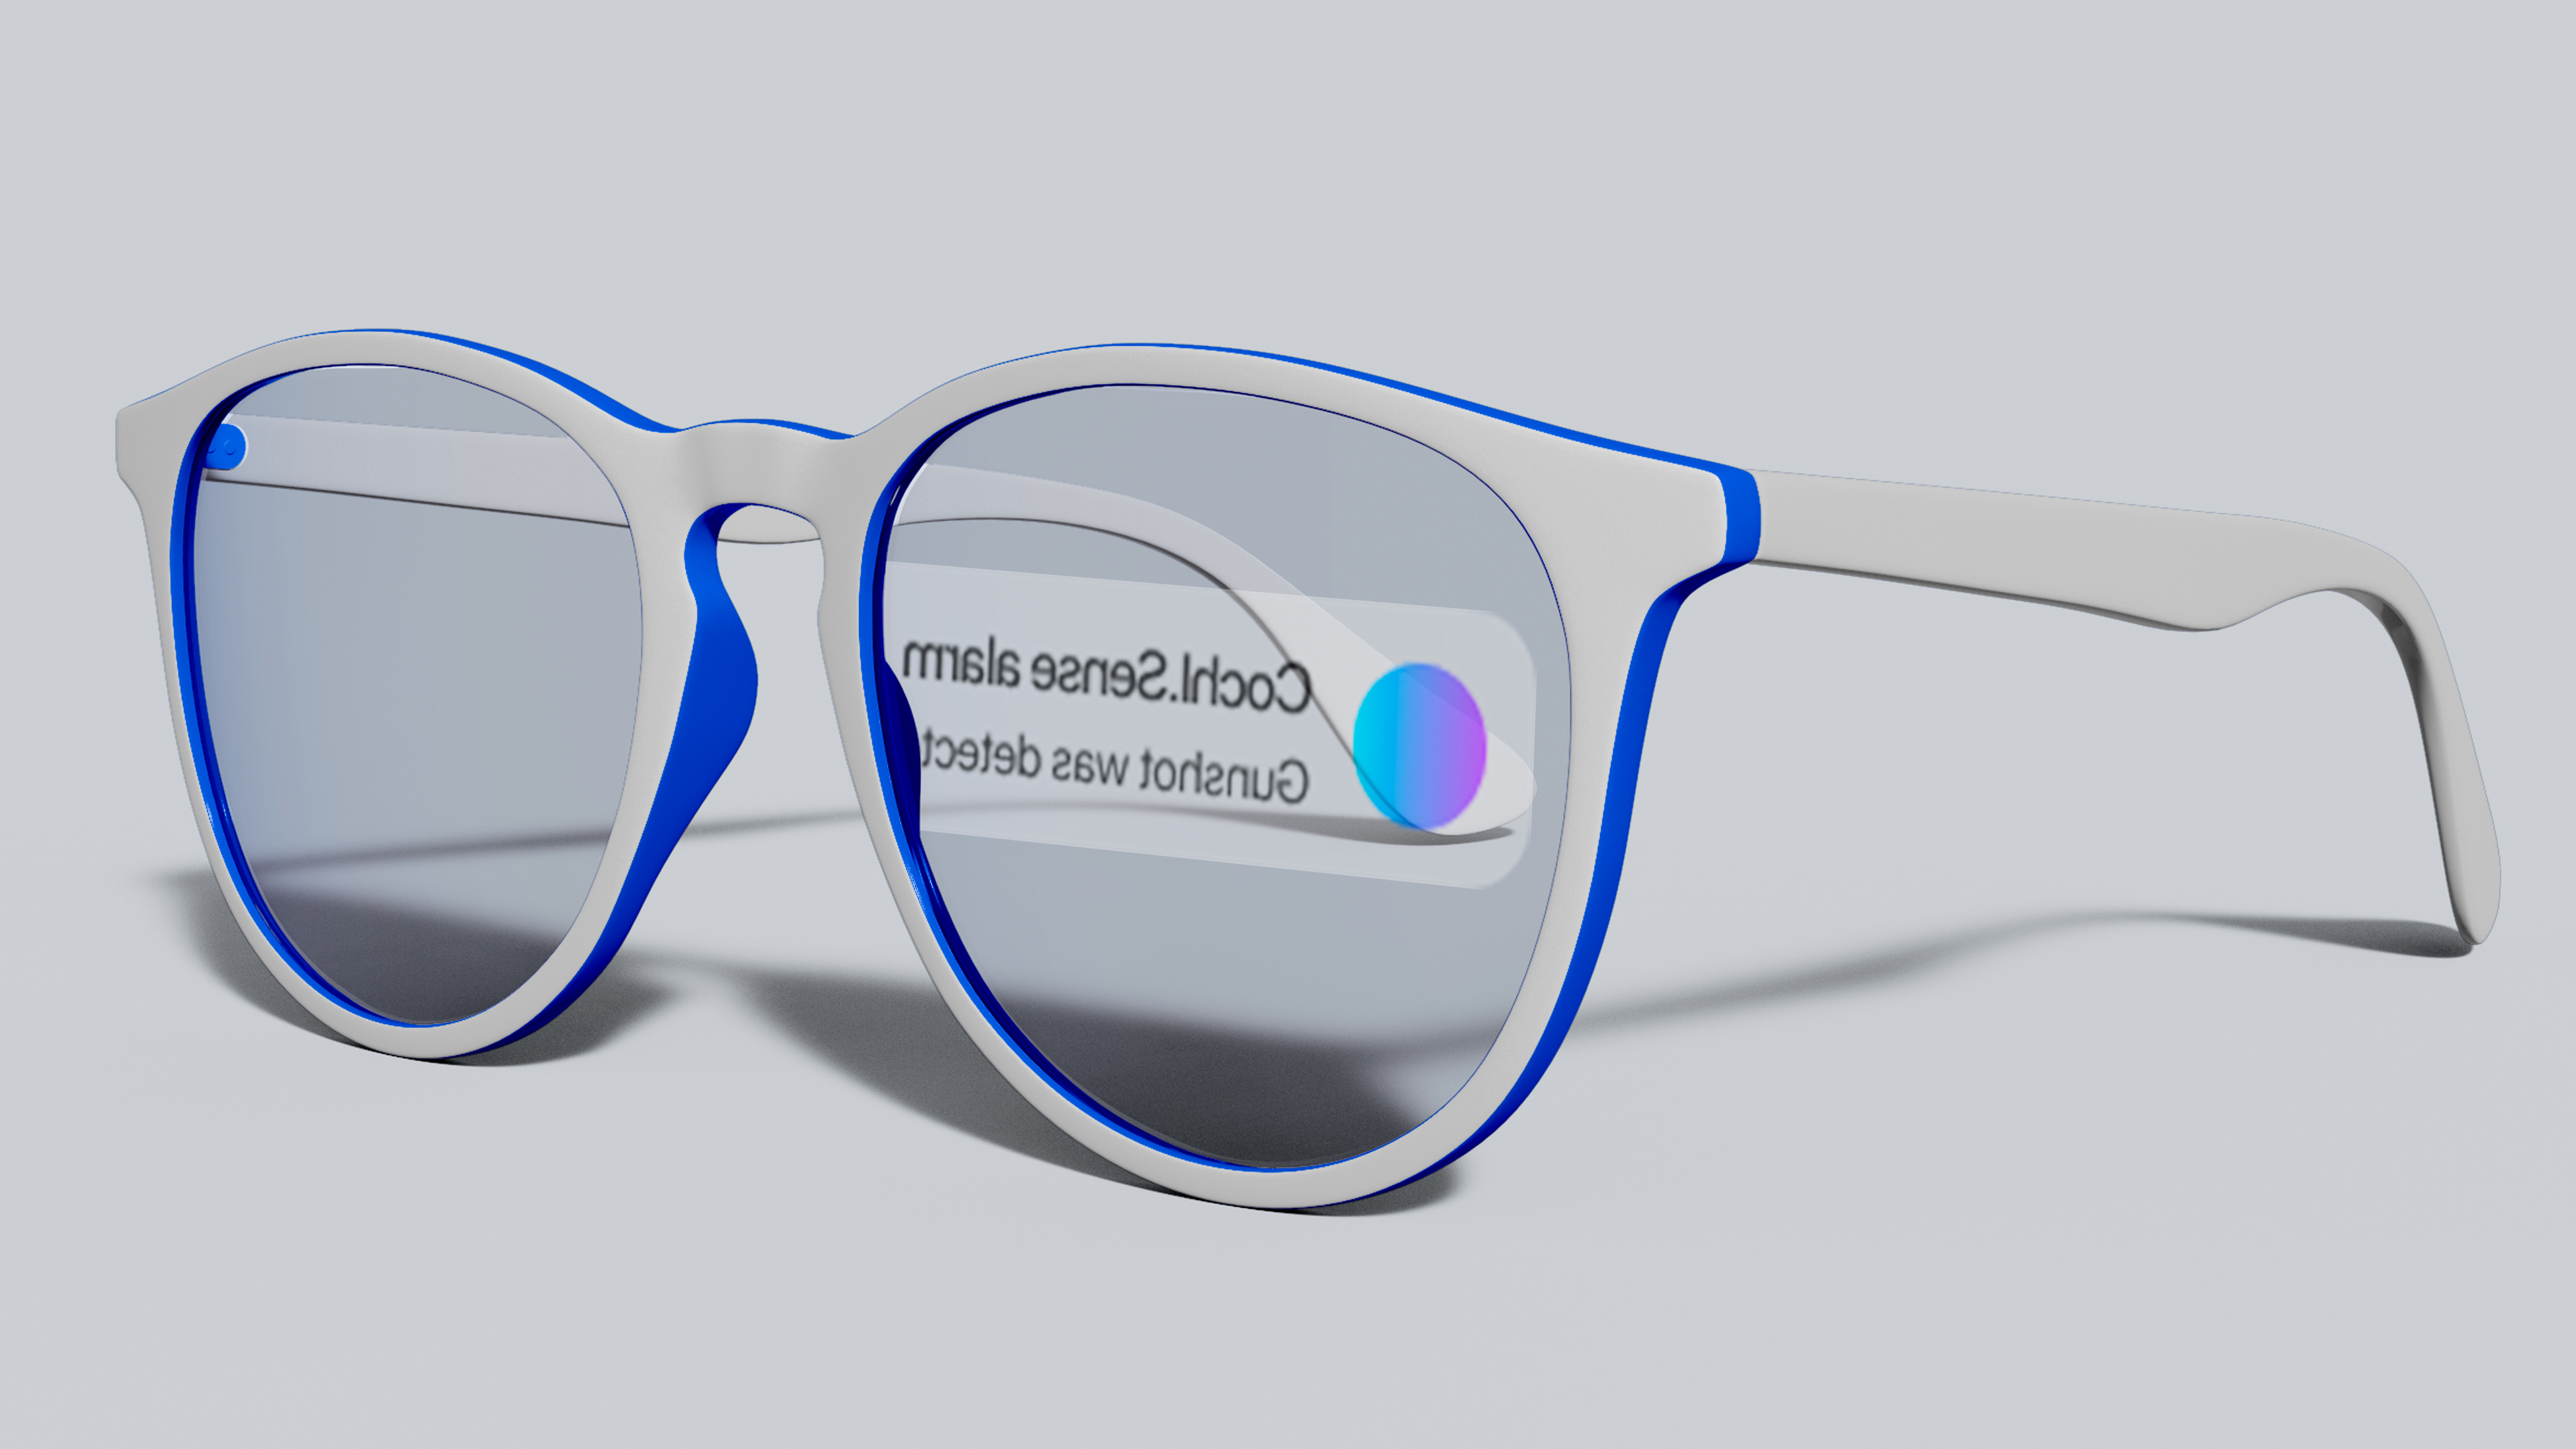 Image of glasses with computer screen reflected.